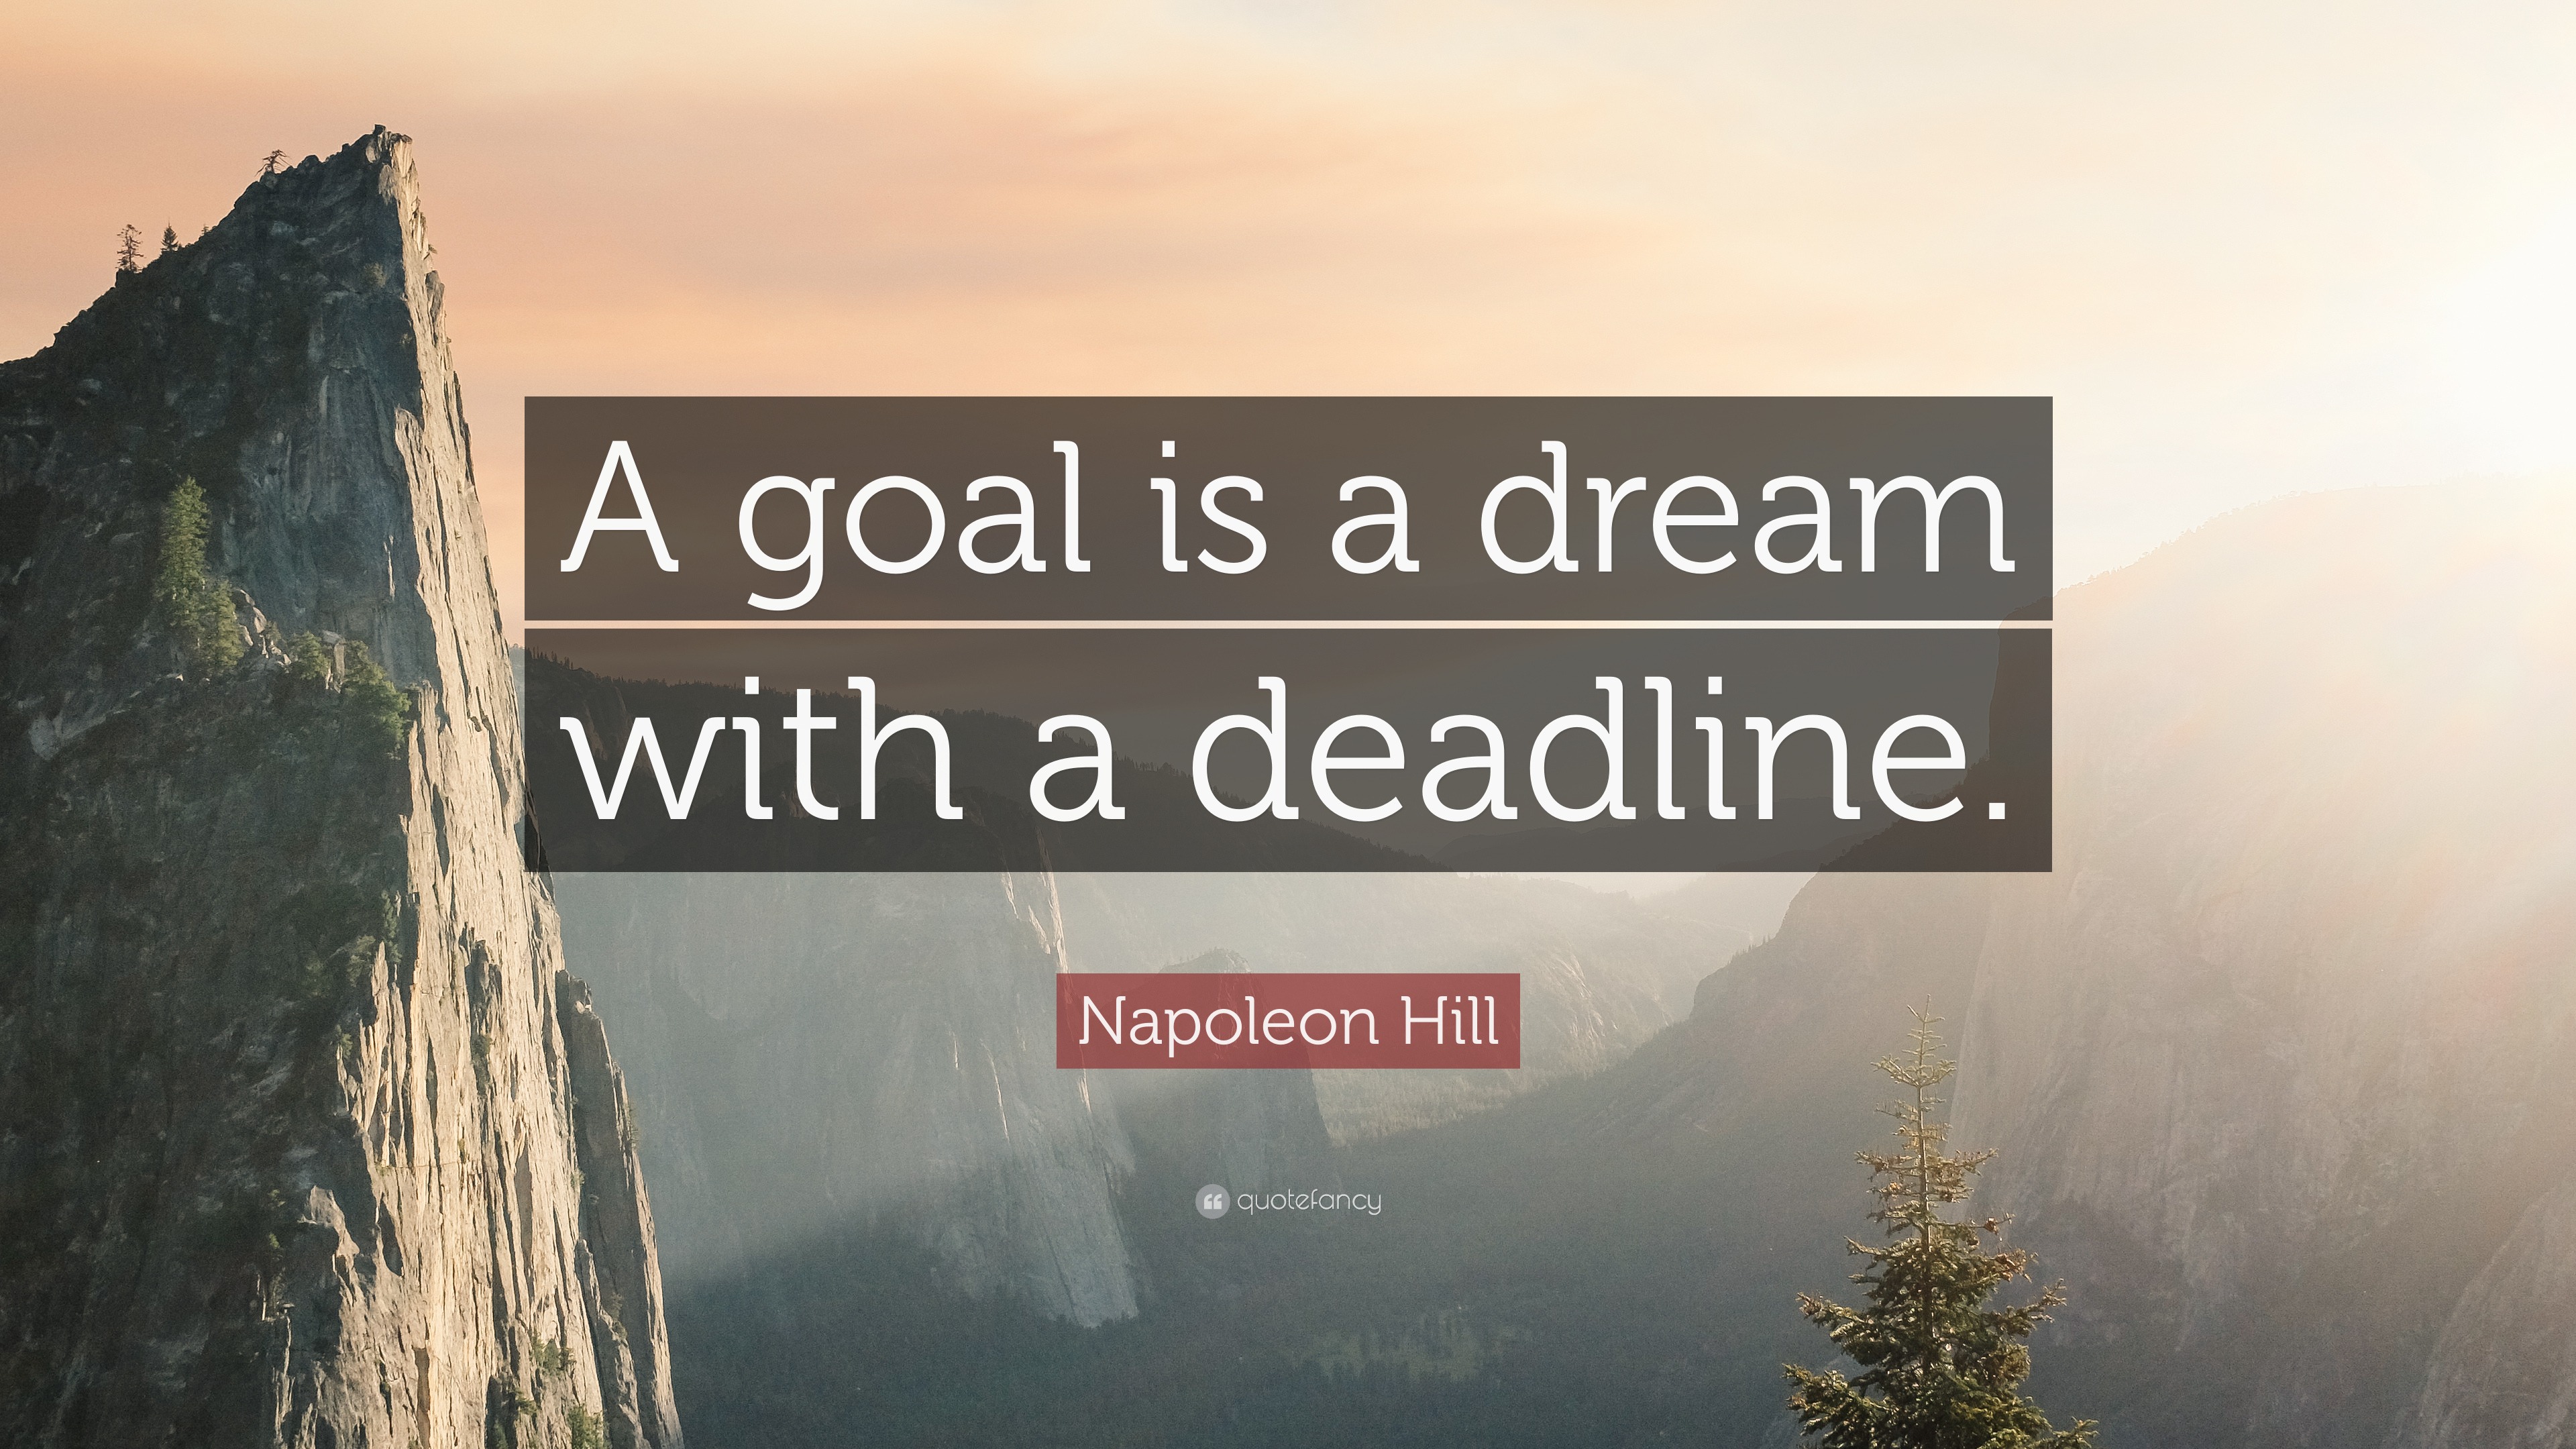 Napoleon Hill Quote “A goal is a dream with a deadline